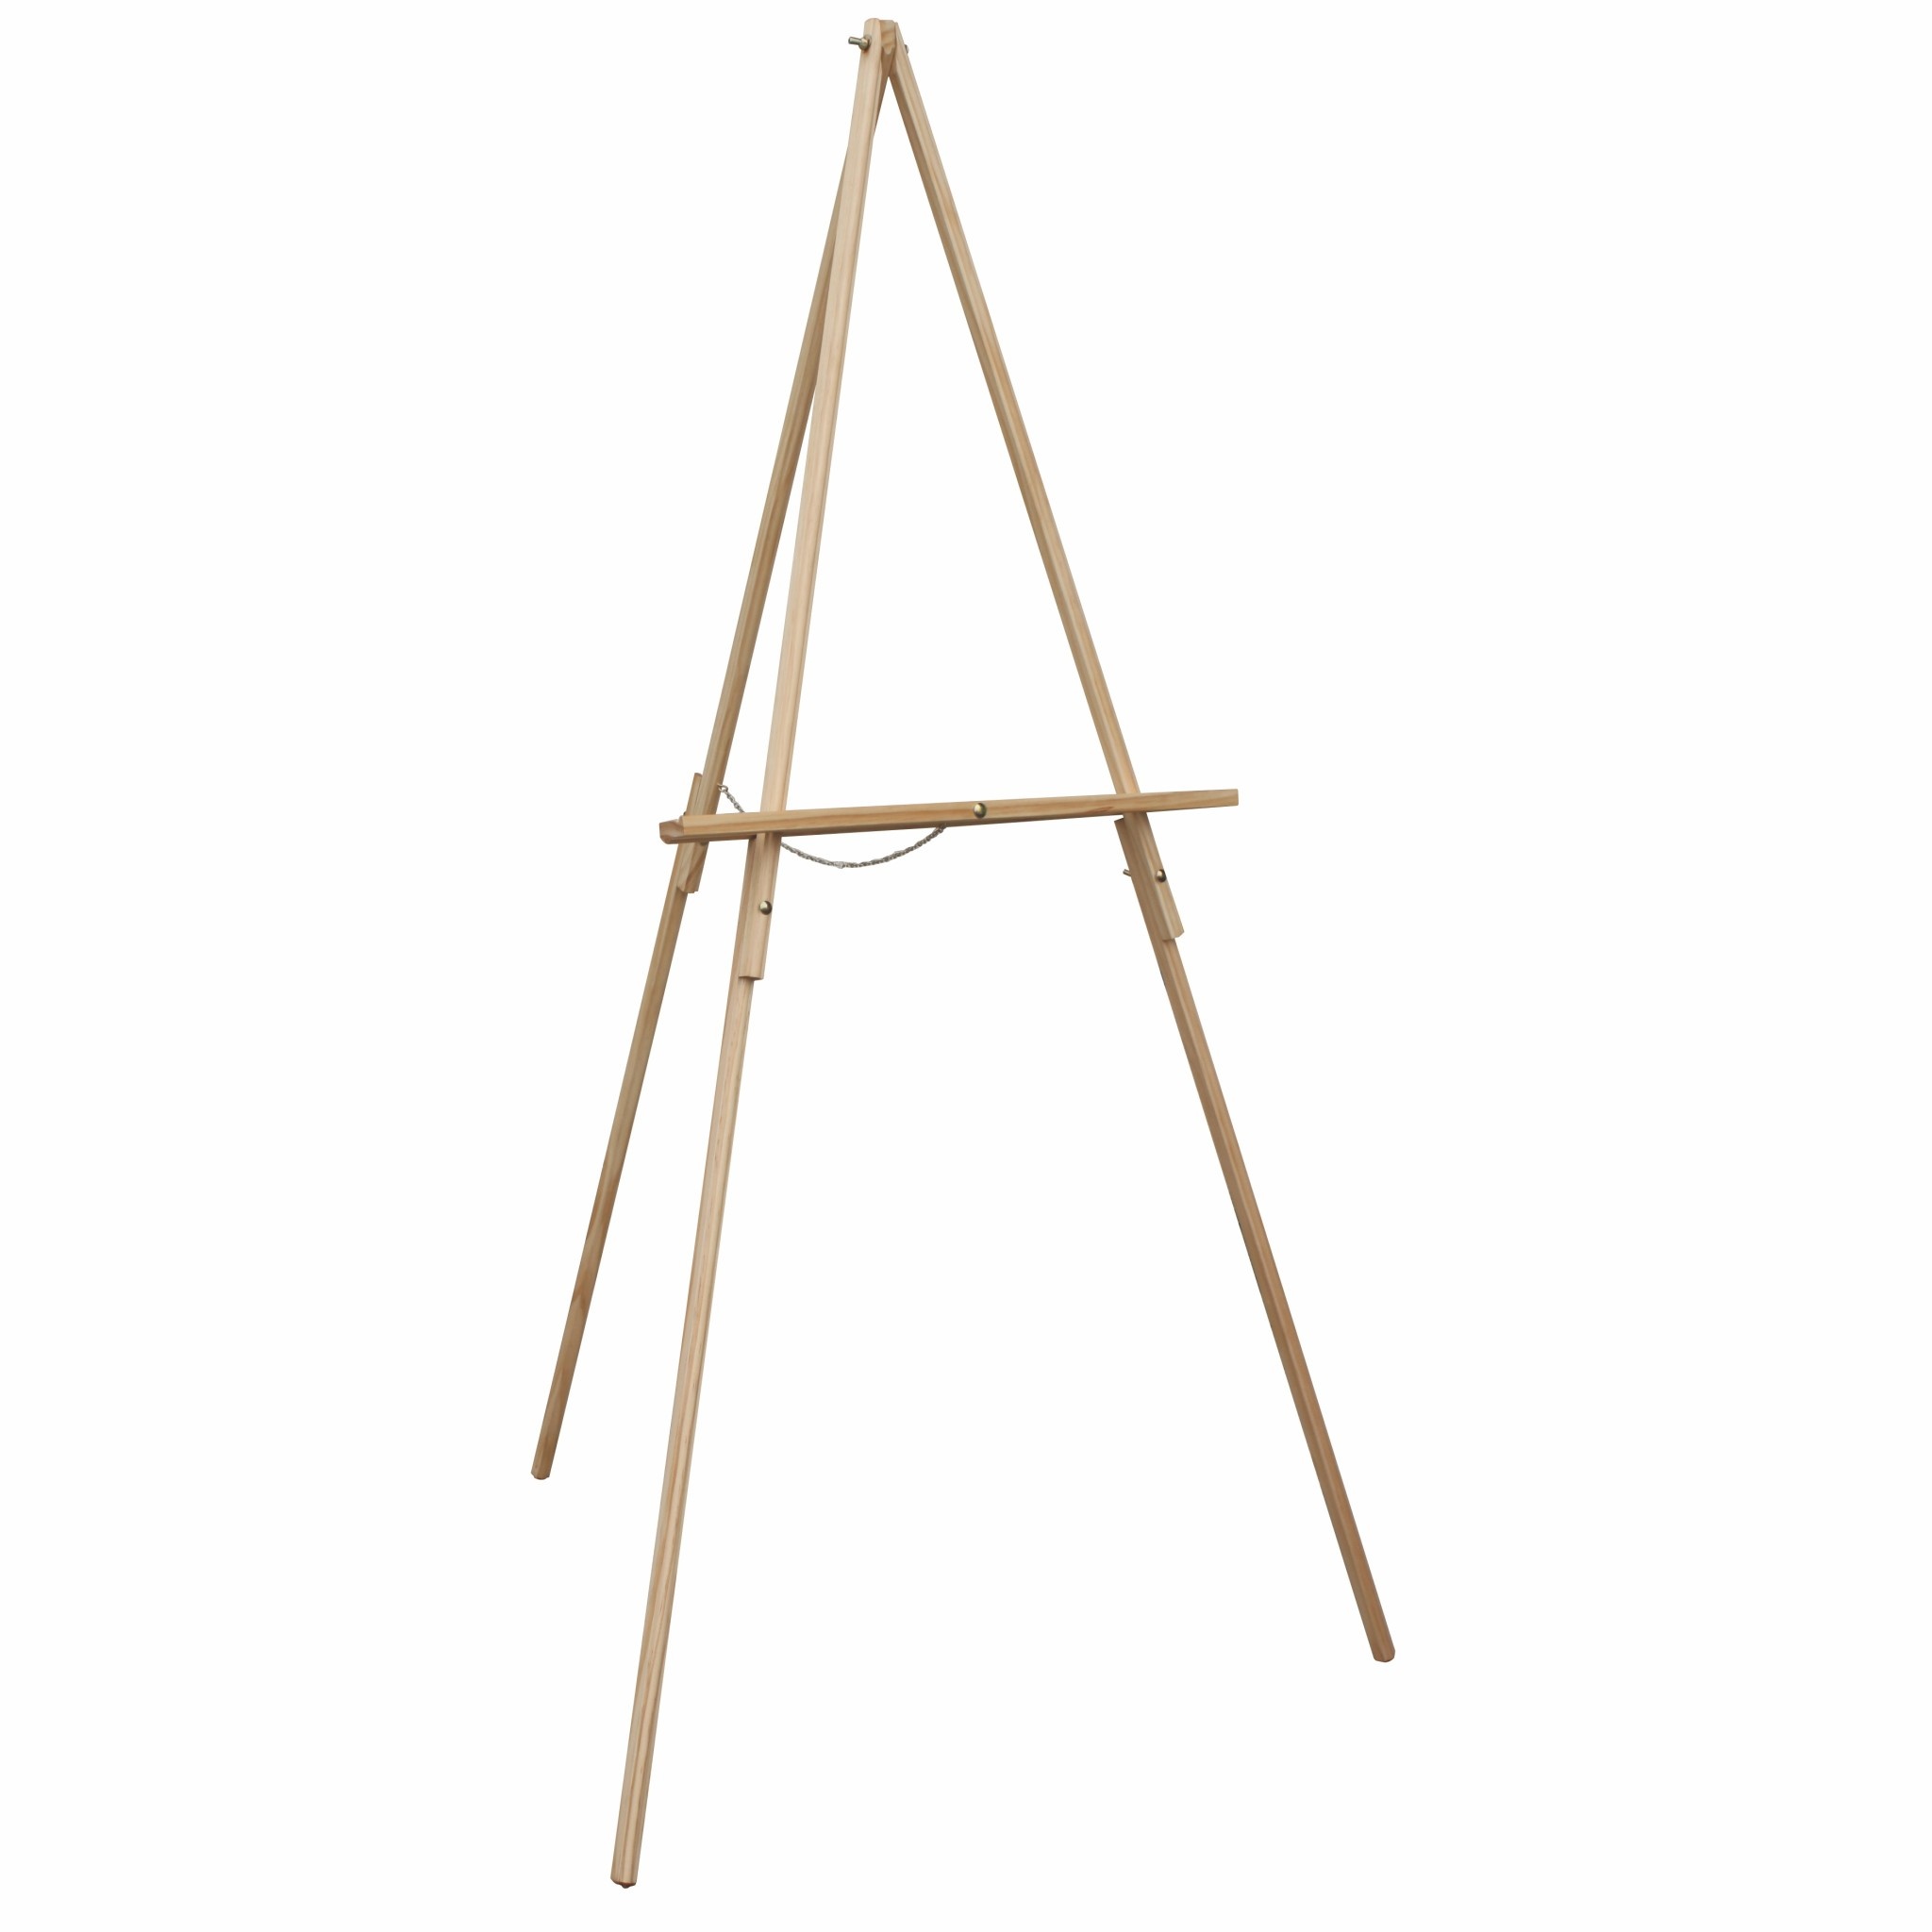 Art Trees Portable Art Display Stands, Easels